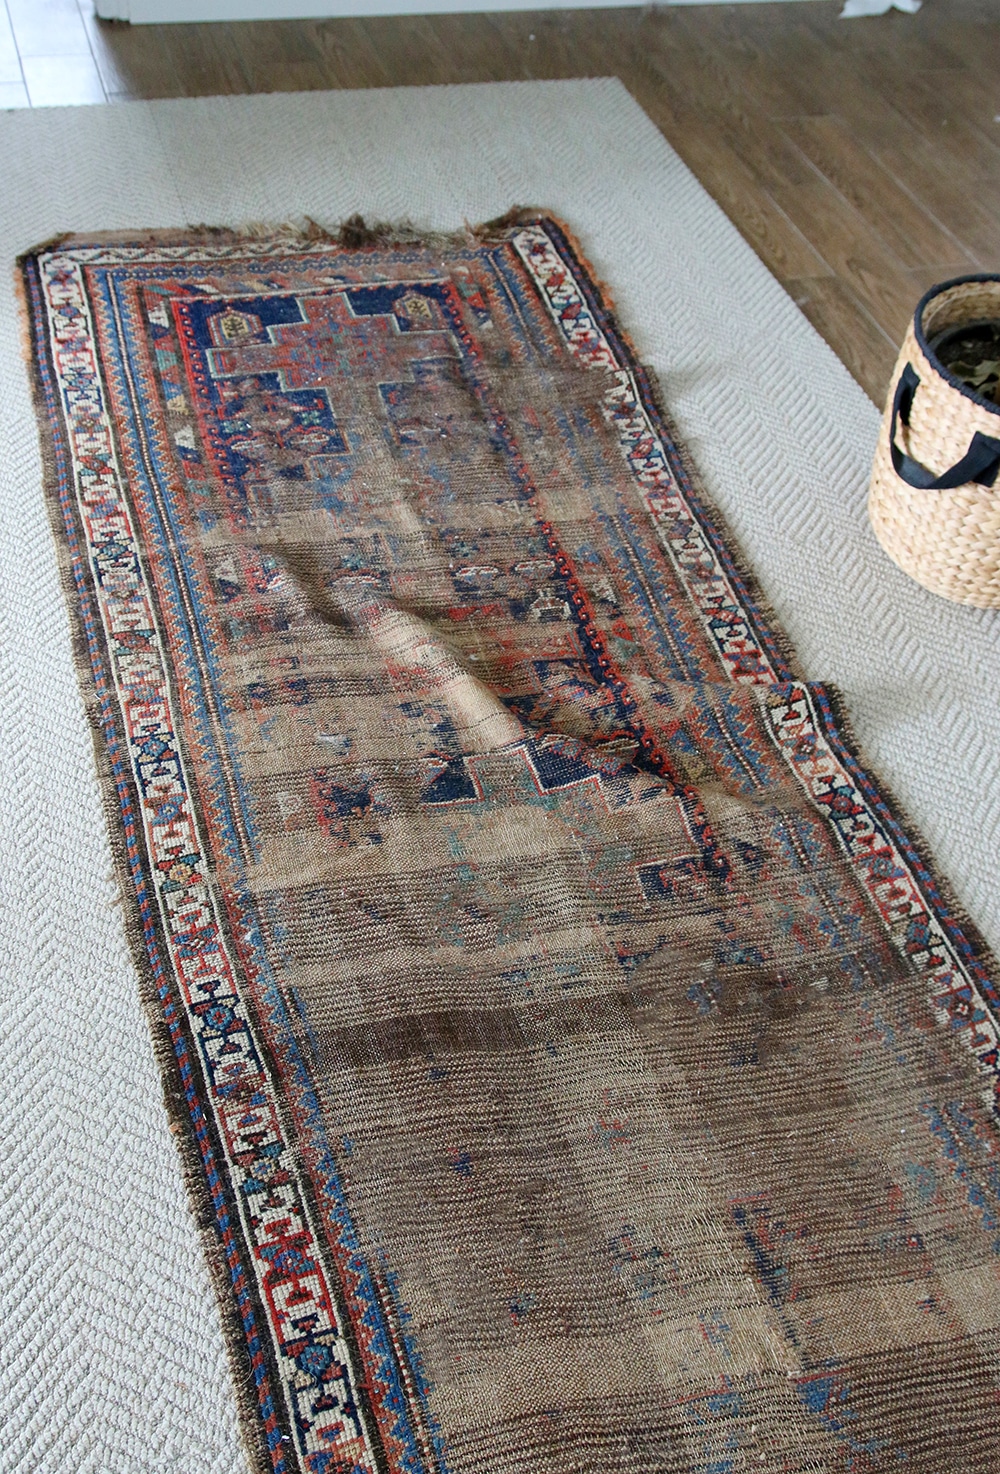 5 Tips For Keeping Area Rugs Exactly, How To Make Rug Stay Flat